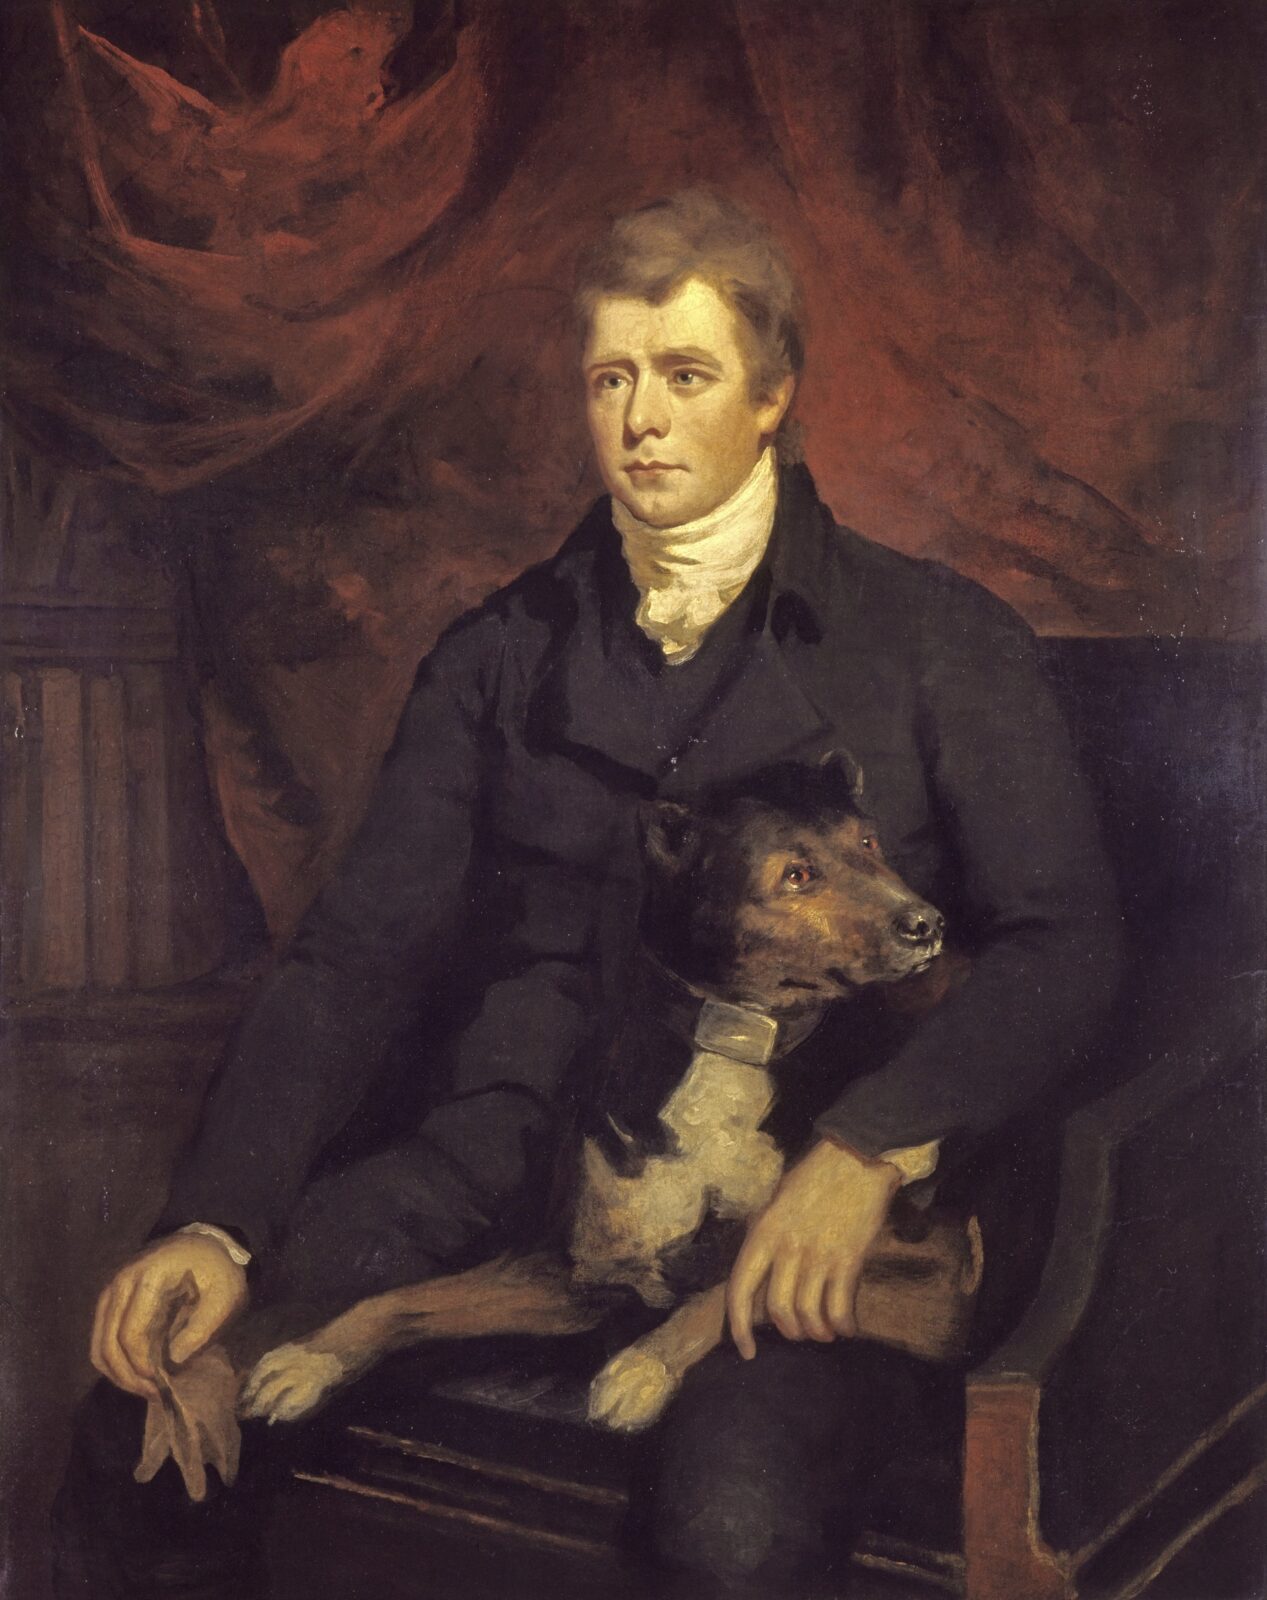 Sir Walter Scott, by James Saxon (1805). Reproduced courtesy of National Galleries of Scotland